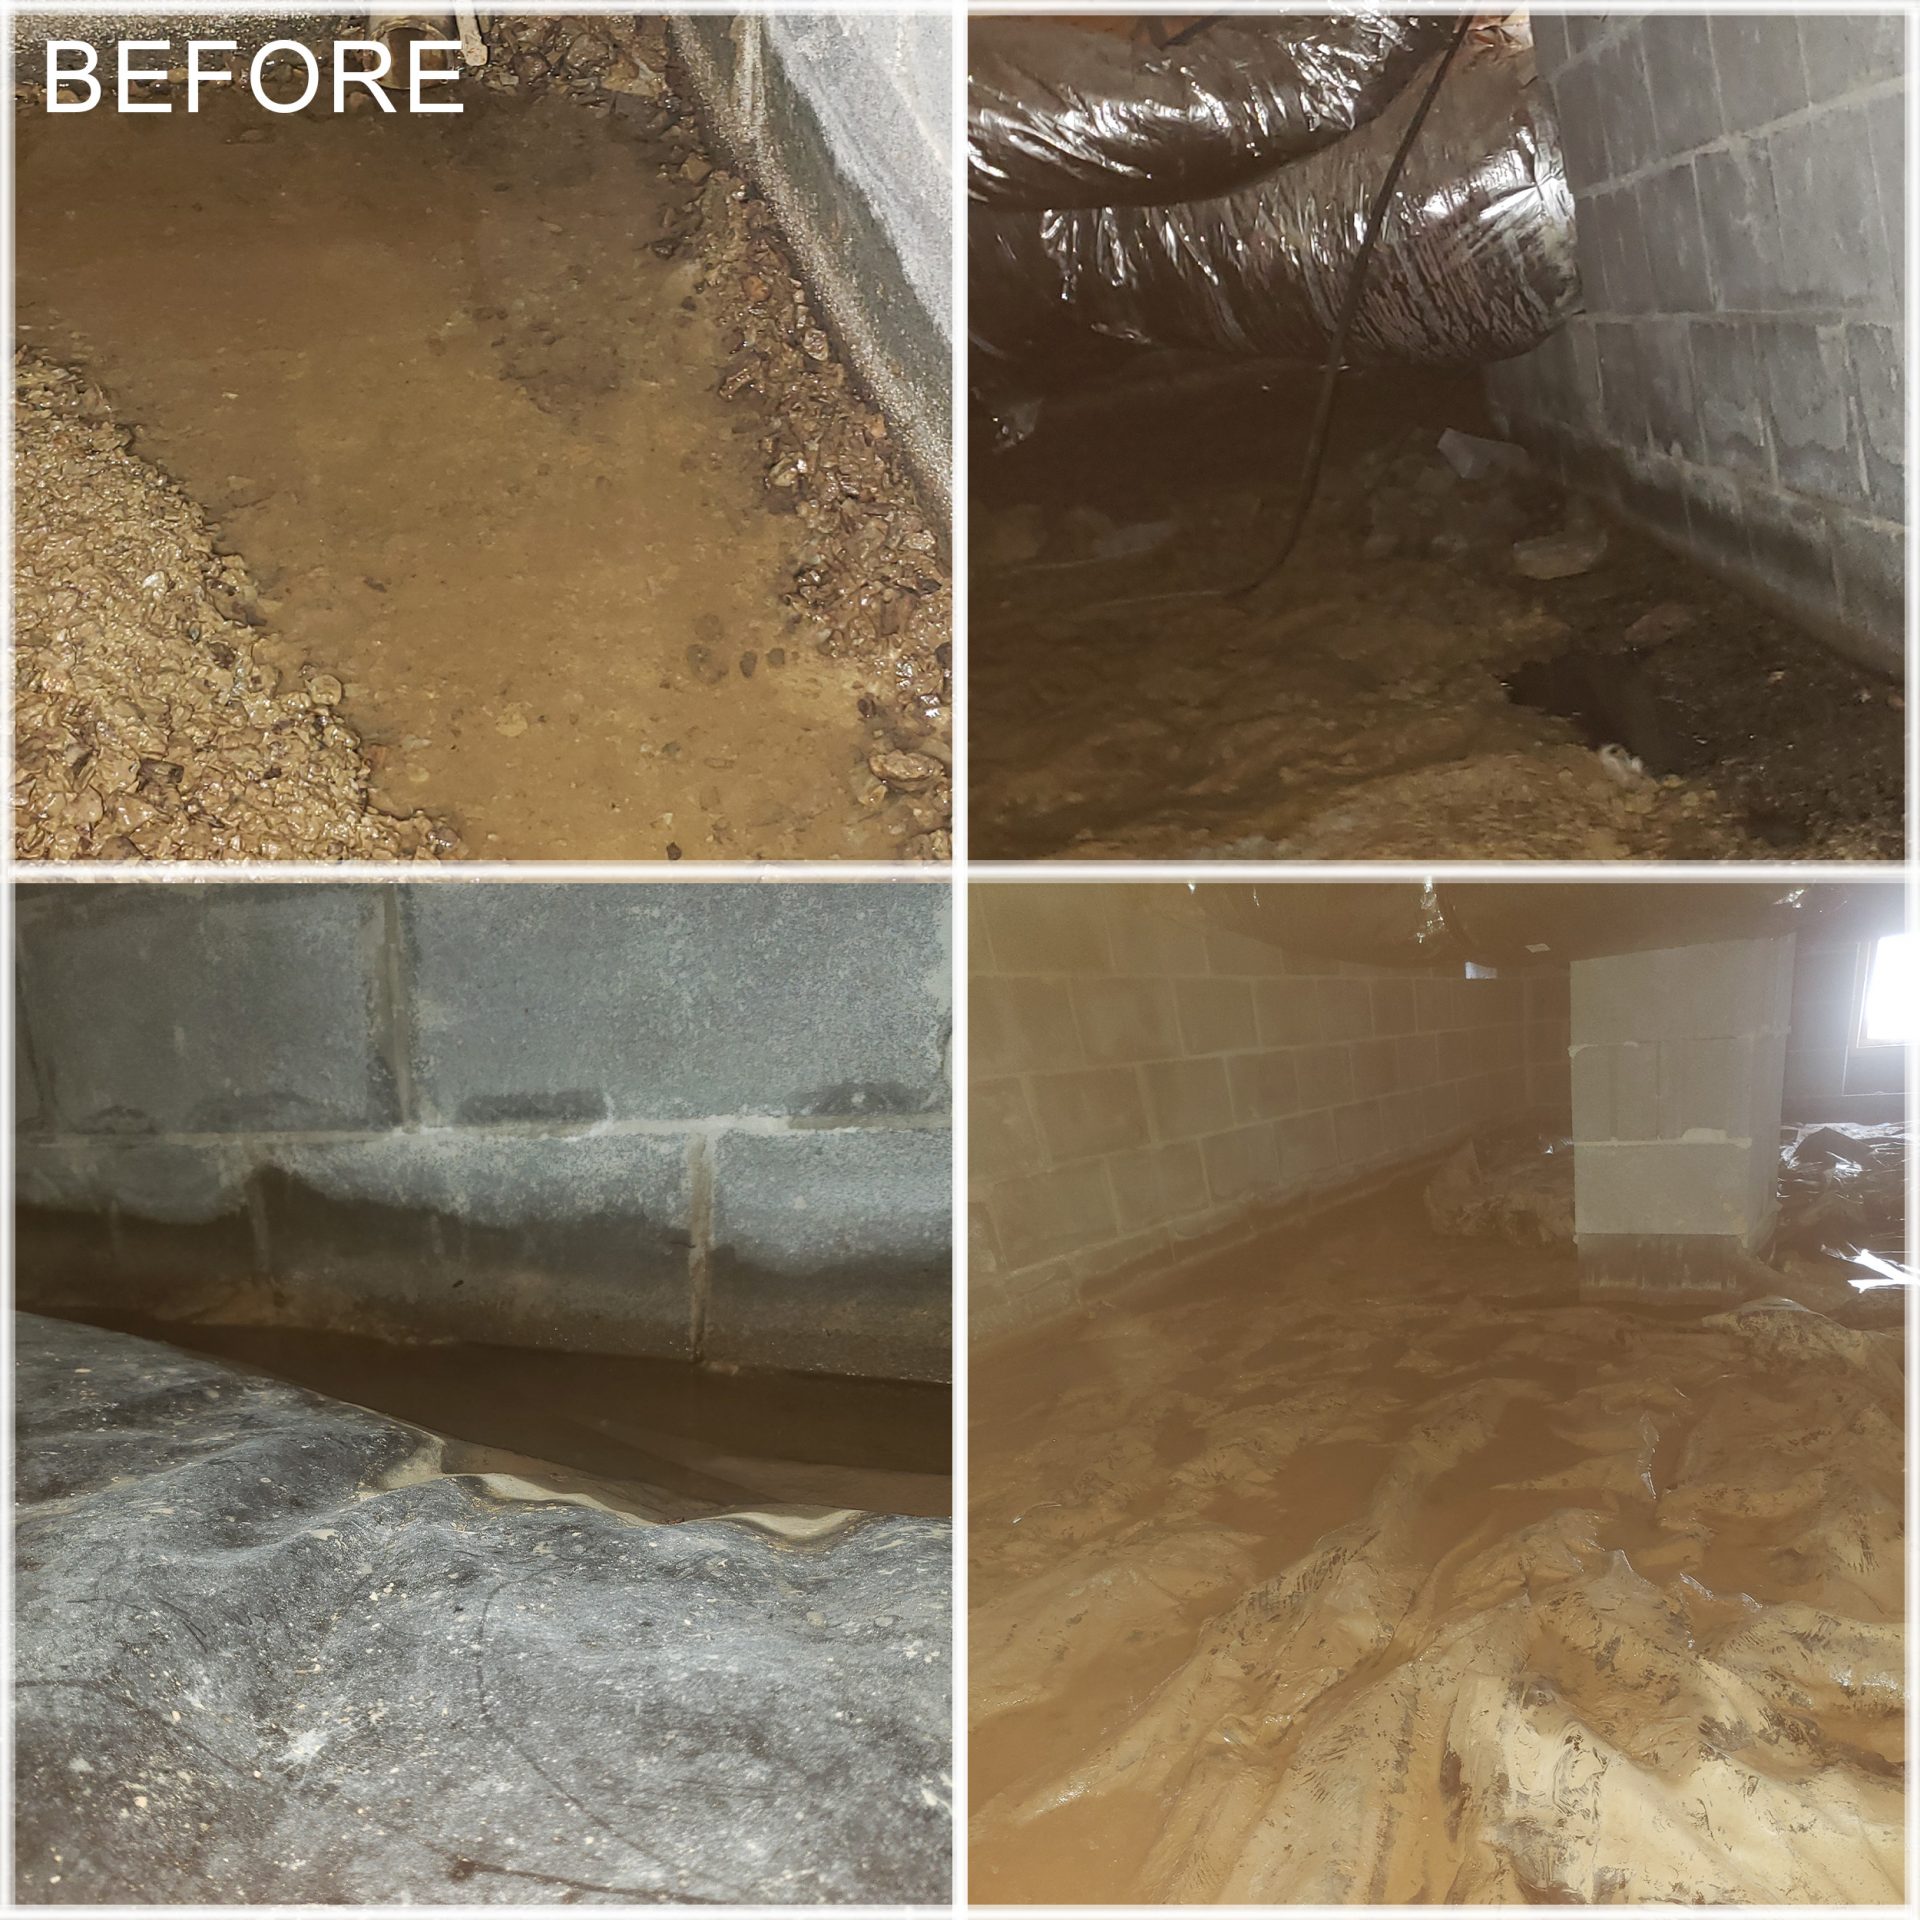 East Tennessee Crawl Space Before Encapsulation